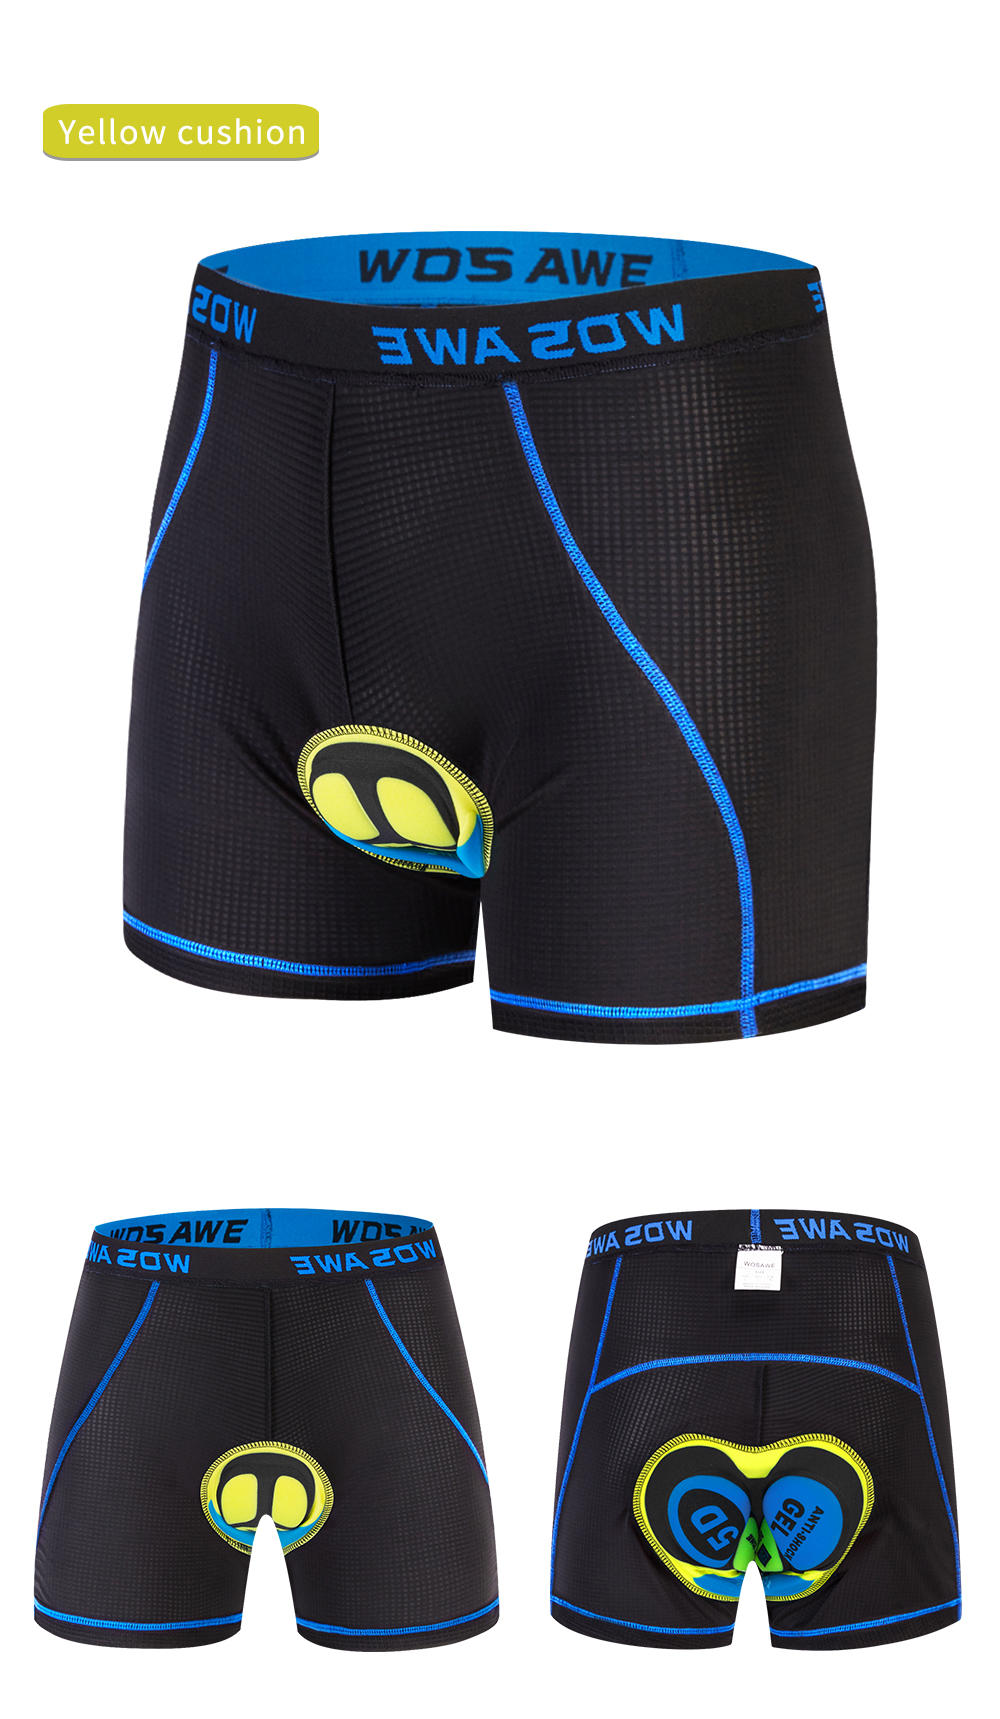 What are the key features that differentiate cycling shorts from regular shorts?